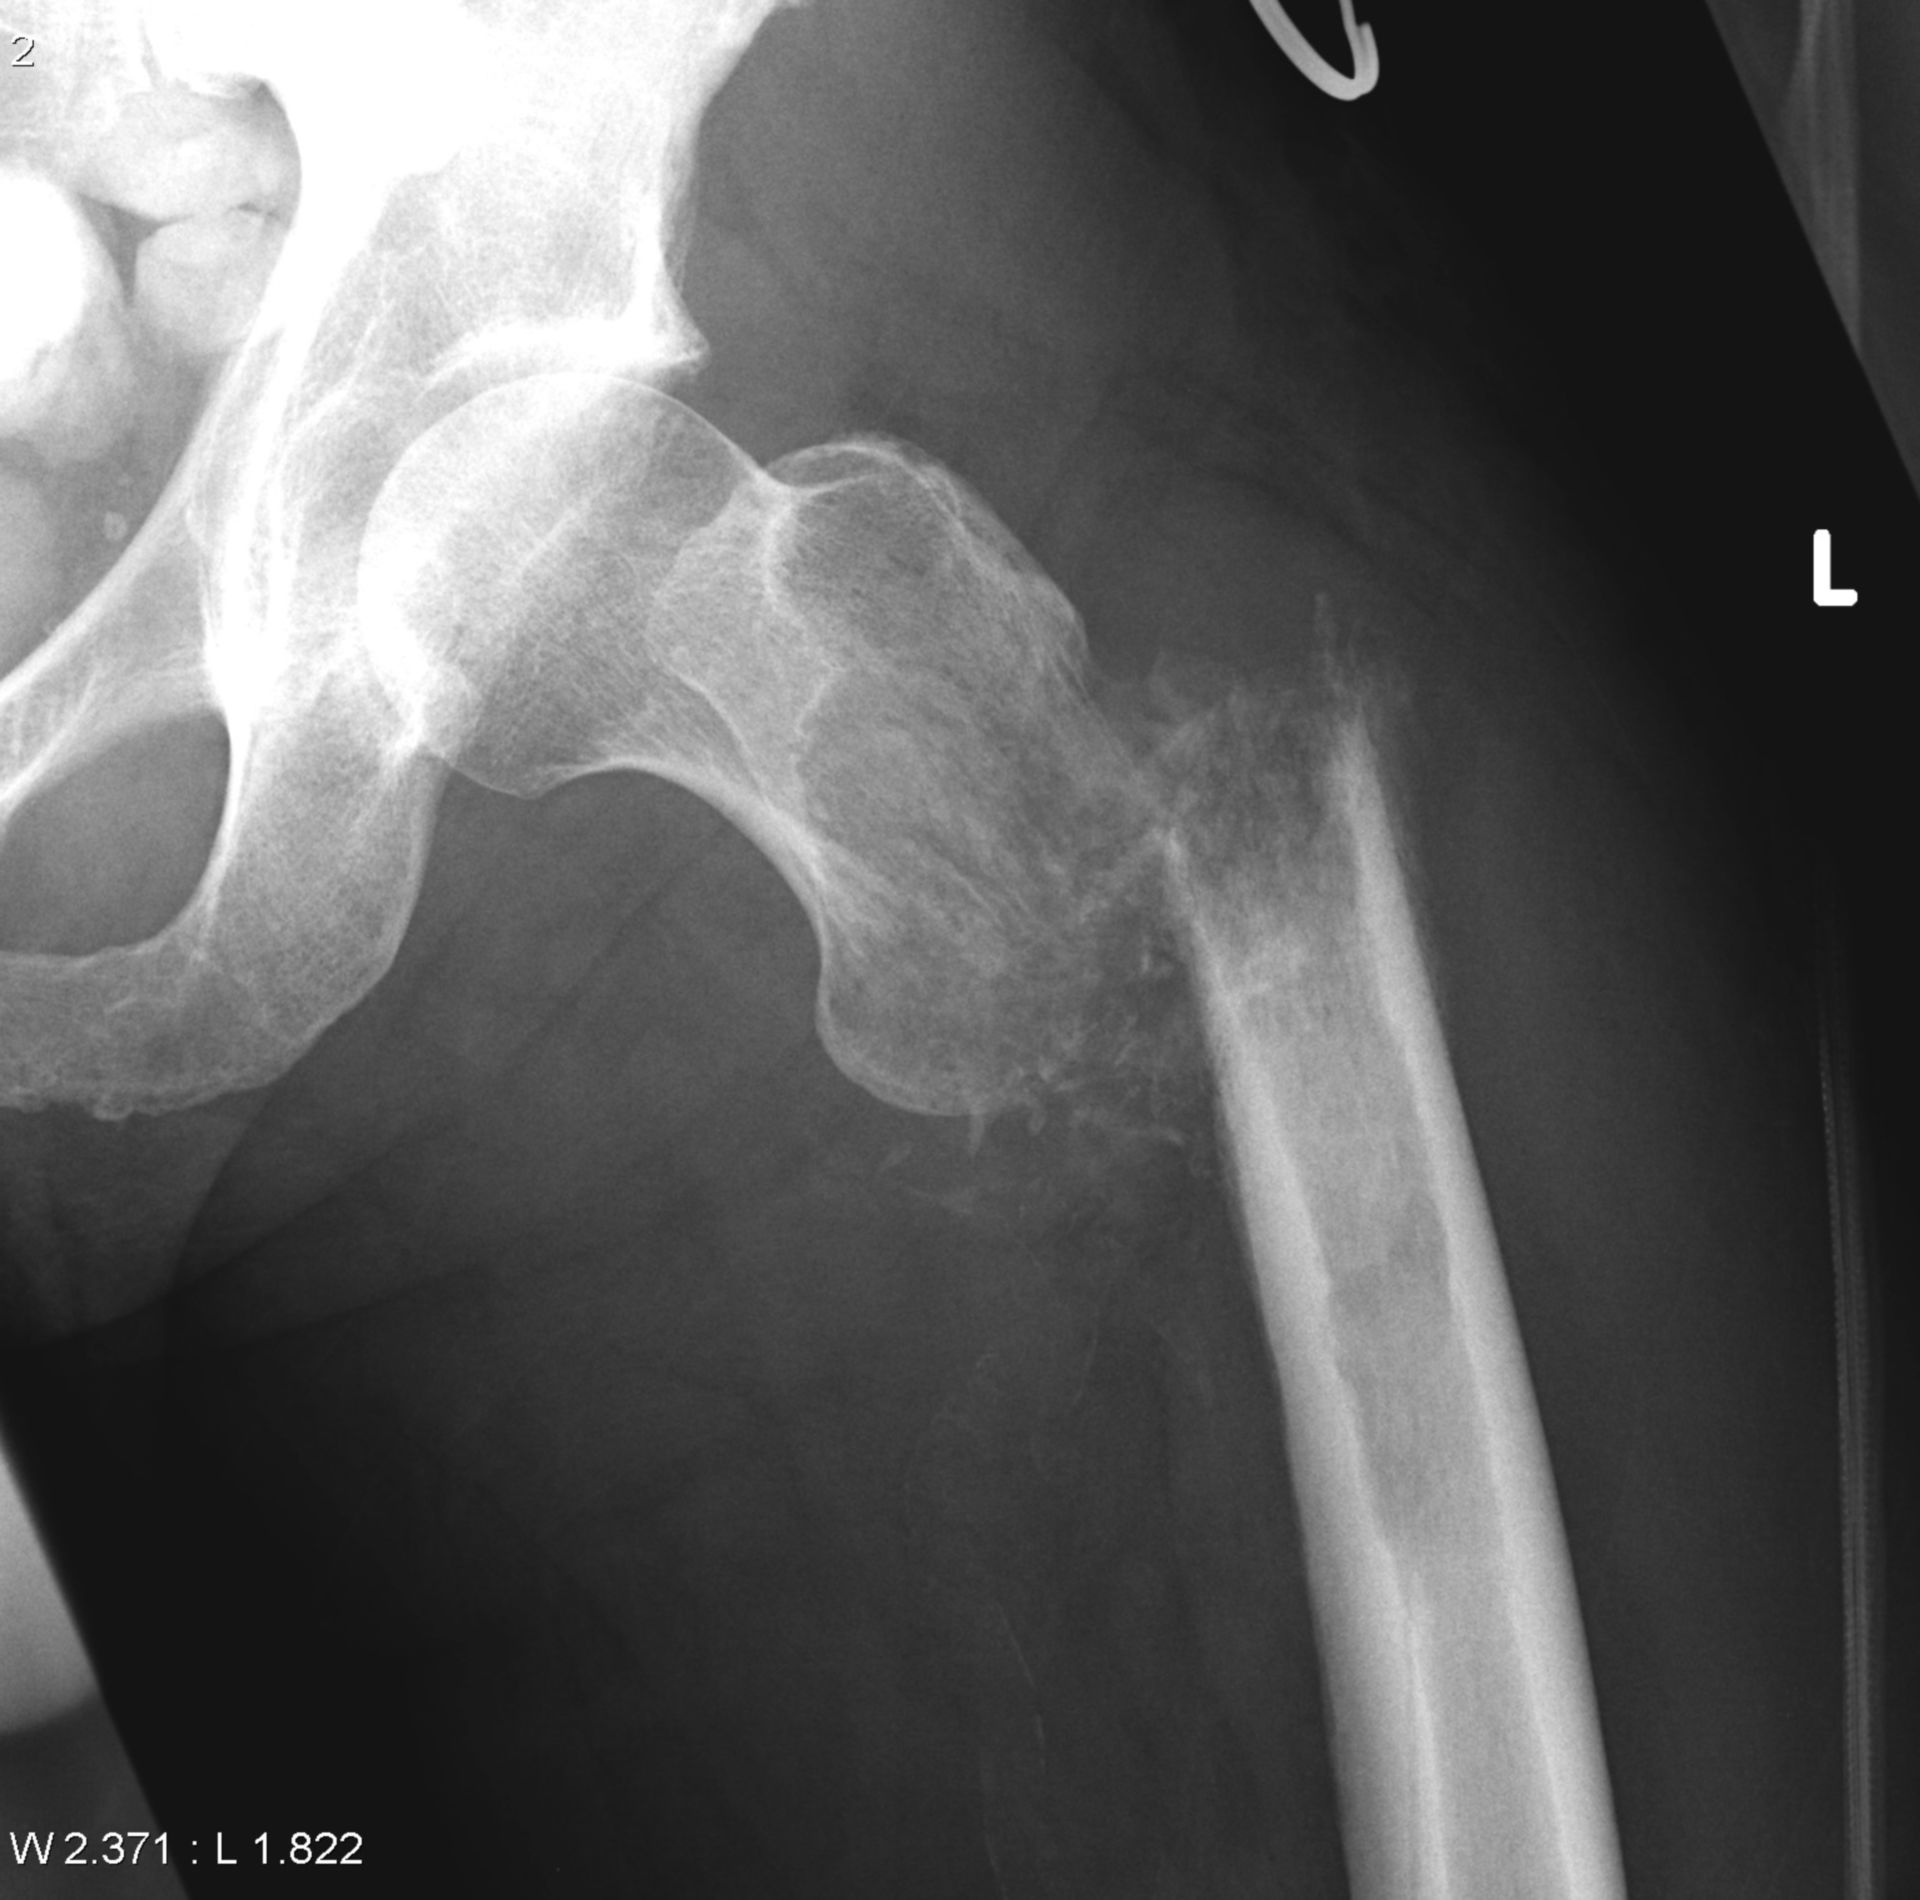 dedifferentiated chondrosarcoma and pathological fracture